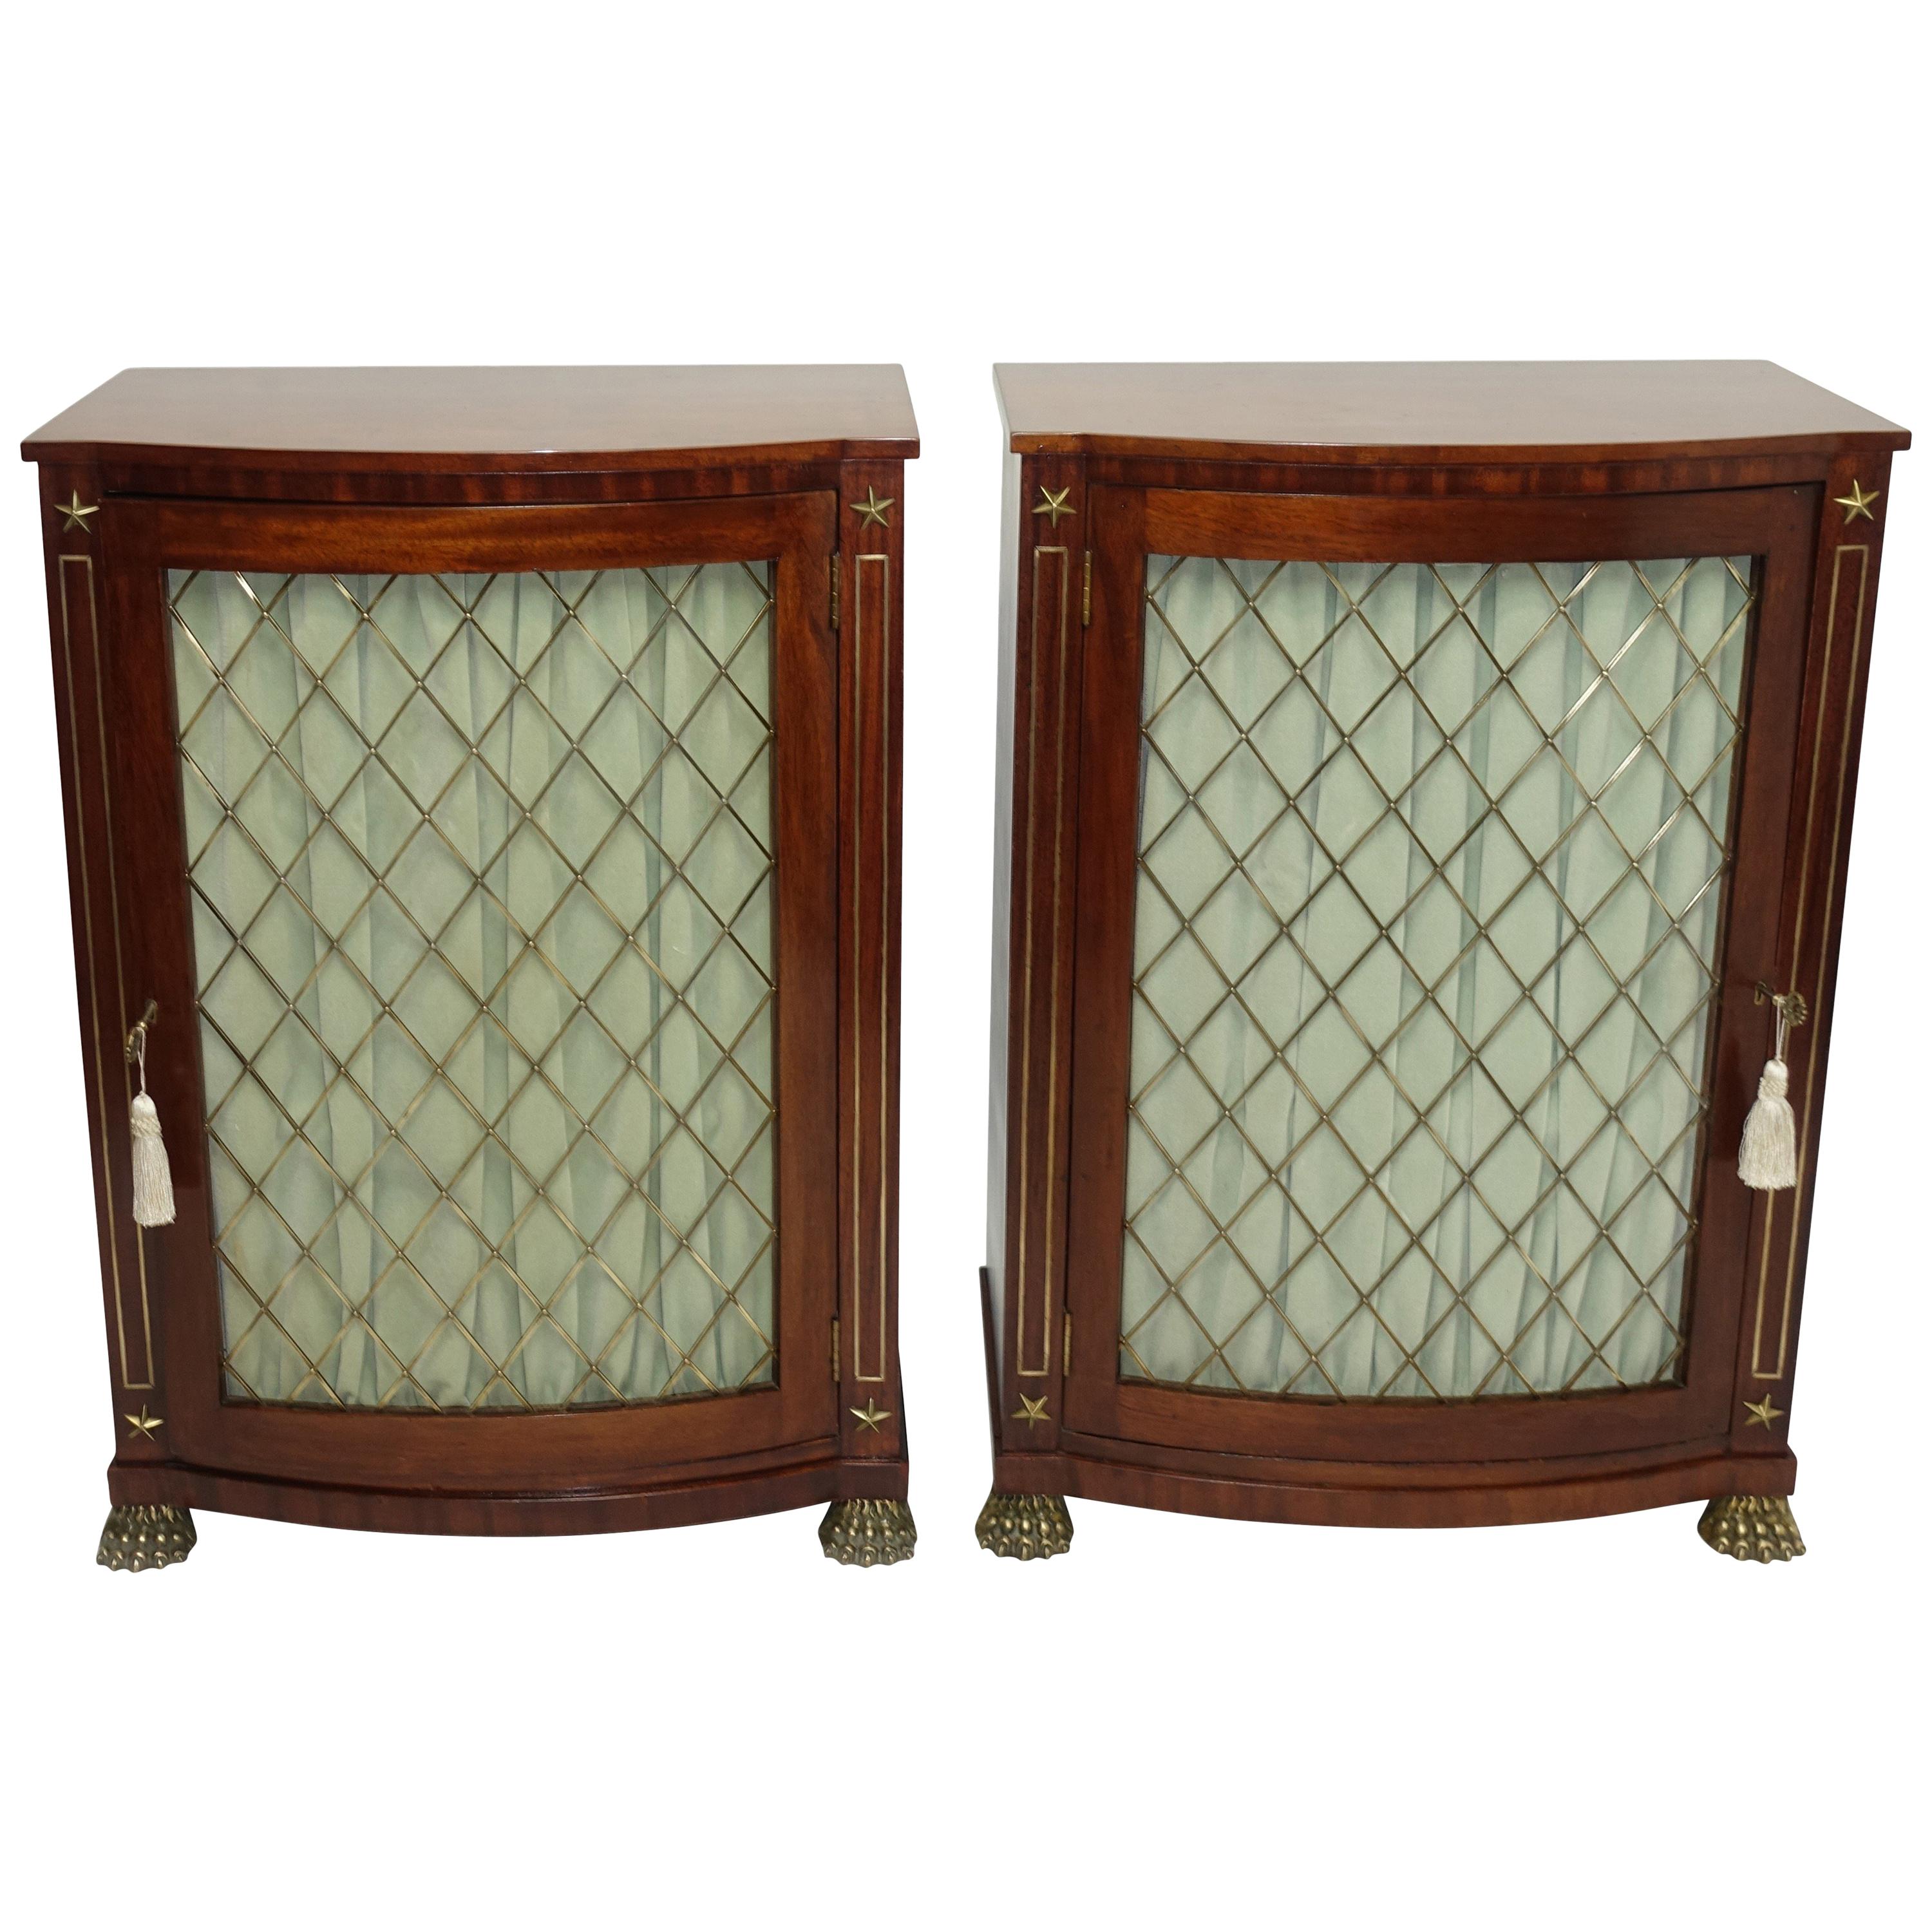 Pair of English Regency Mahogany Side Cabinets with Brass Mounts, circa 1820